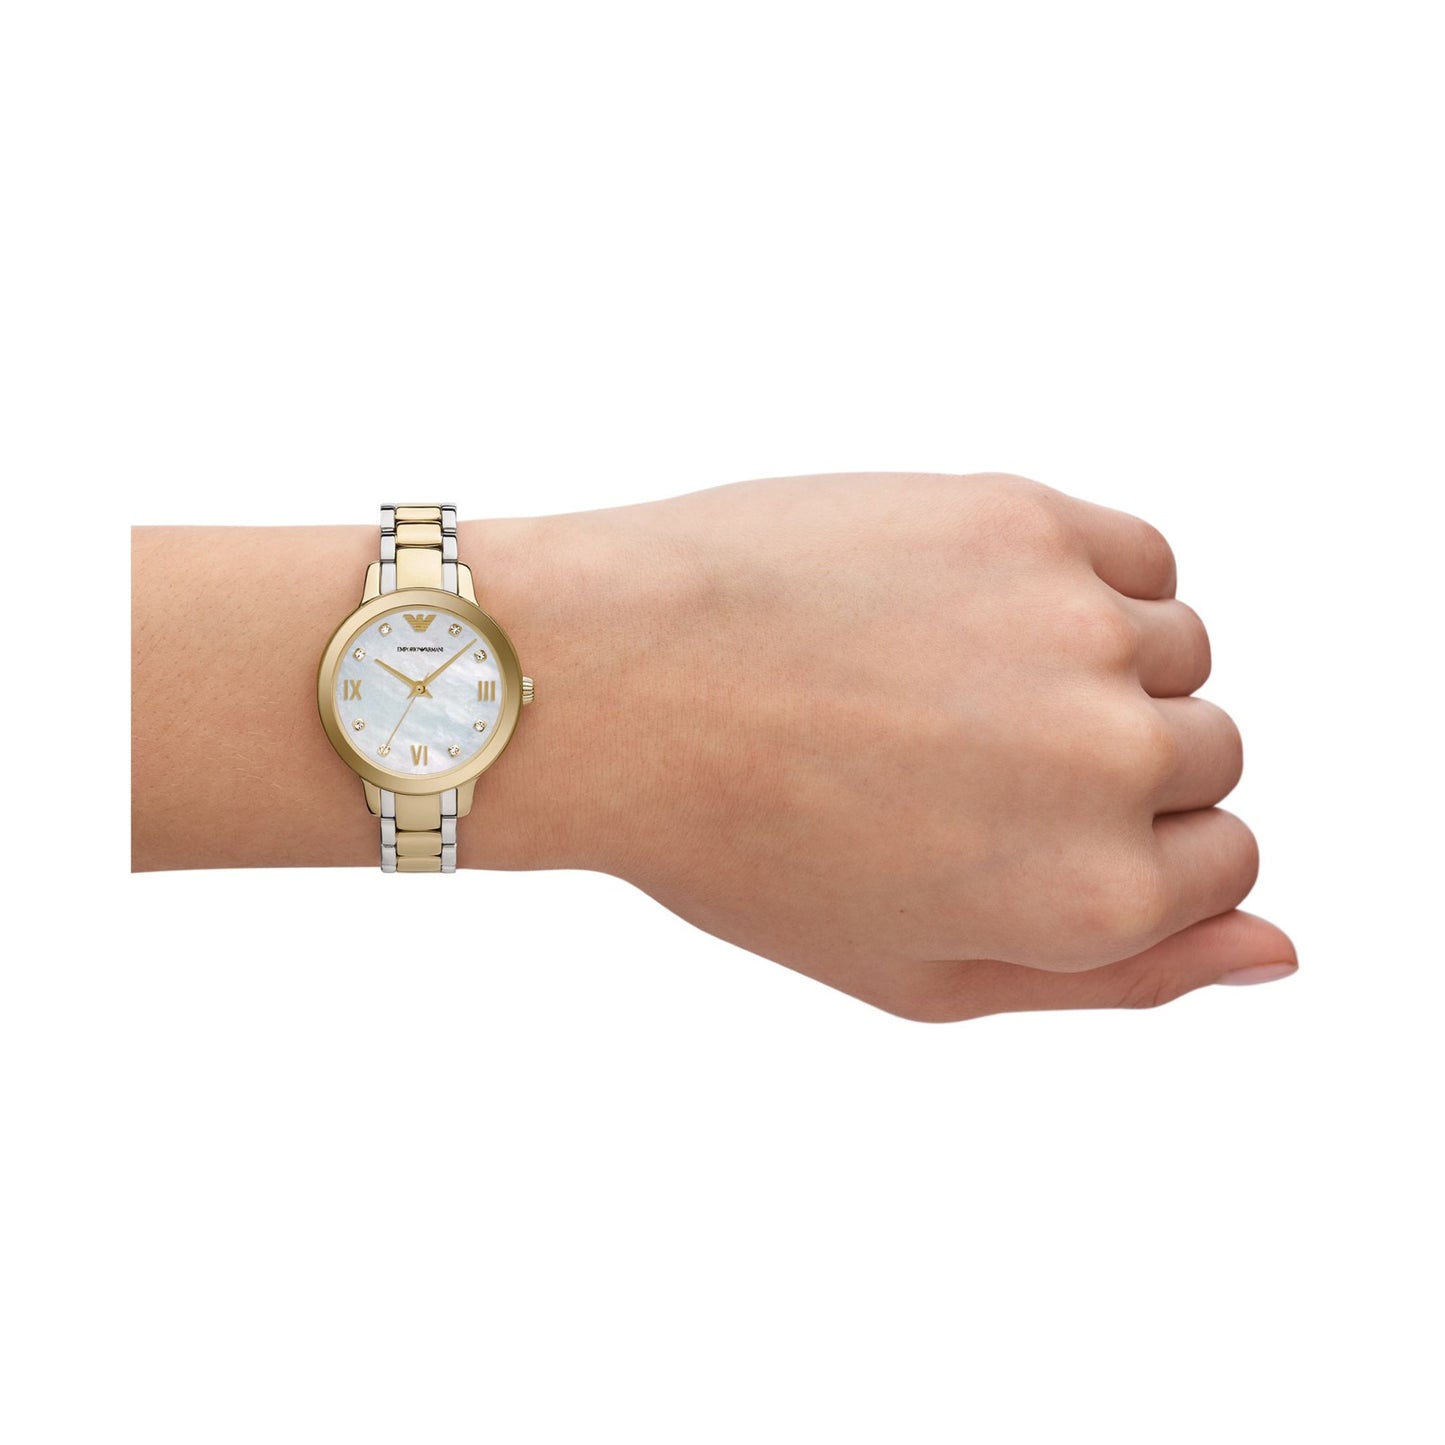 Emporio Armani 32mm Cleo Two Tone Mother of Pearl CZ Link Watch